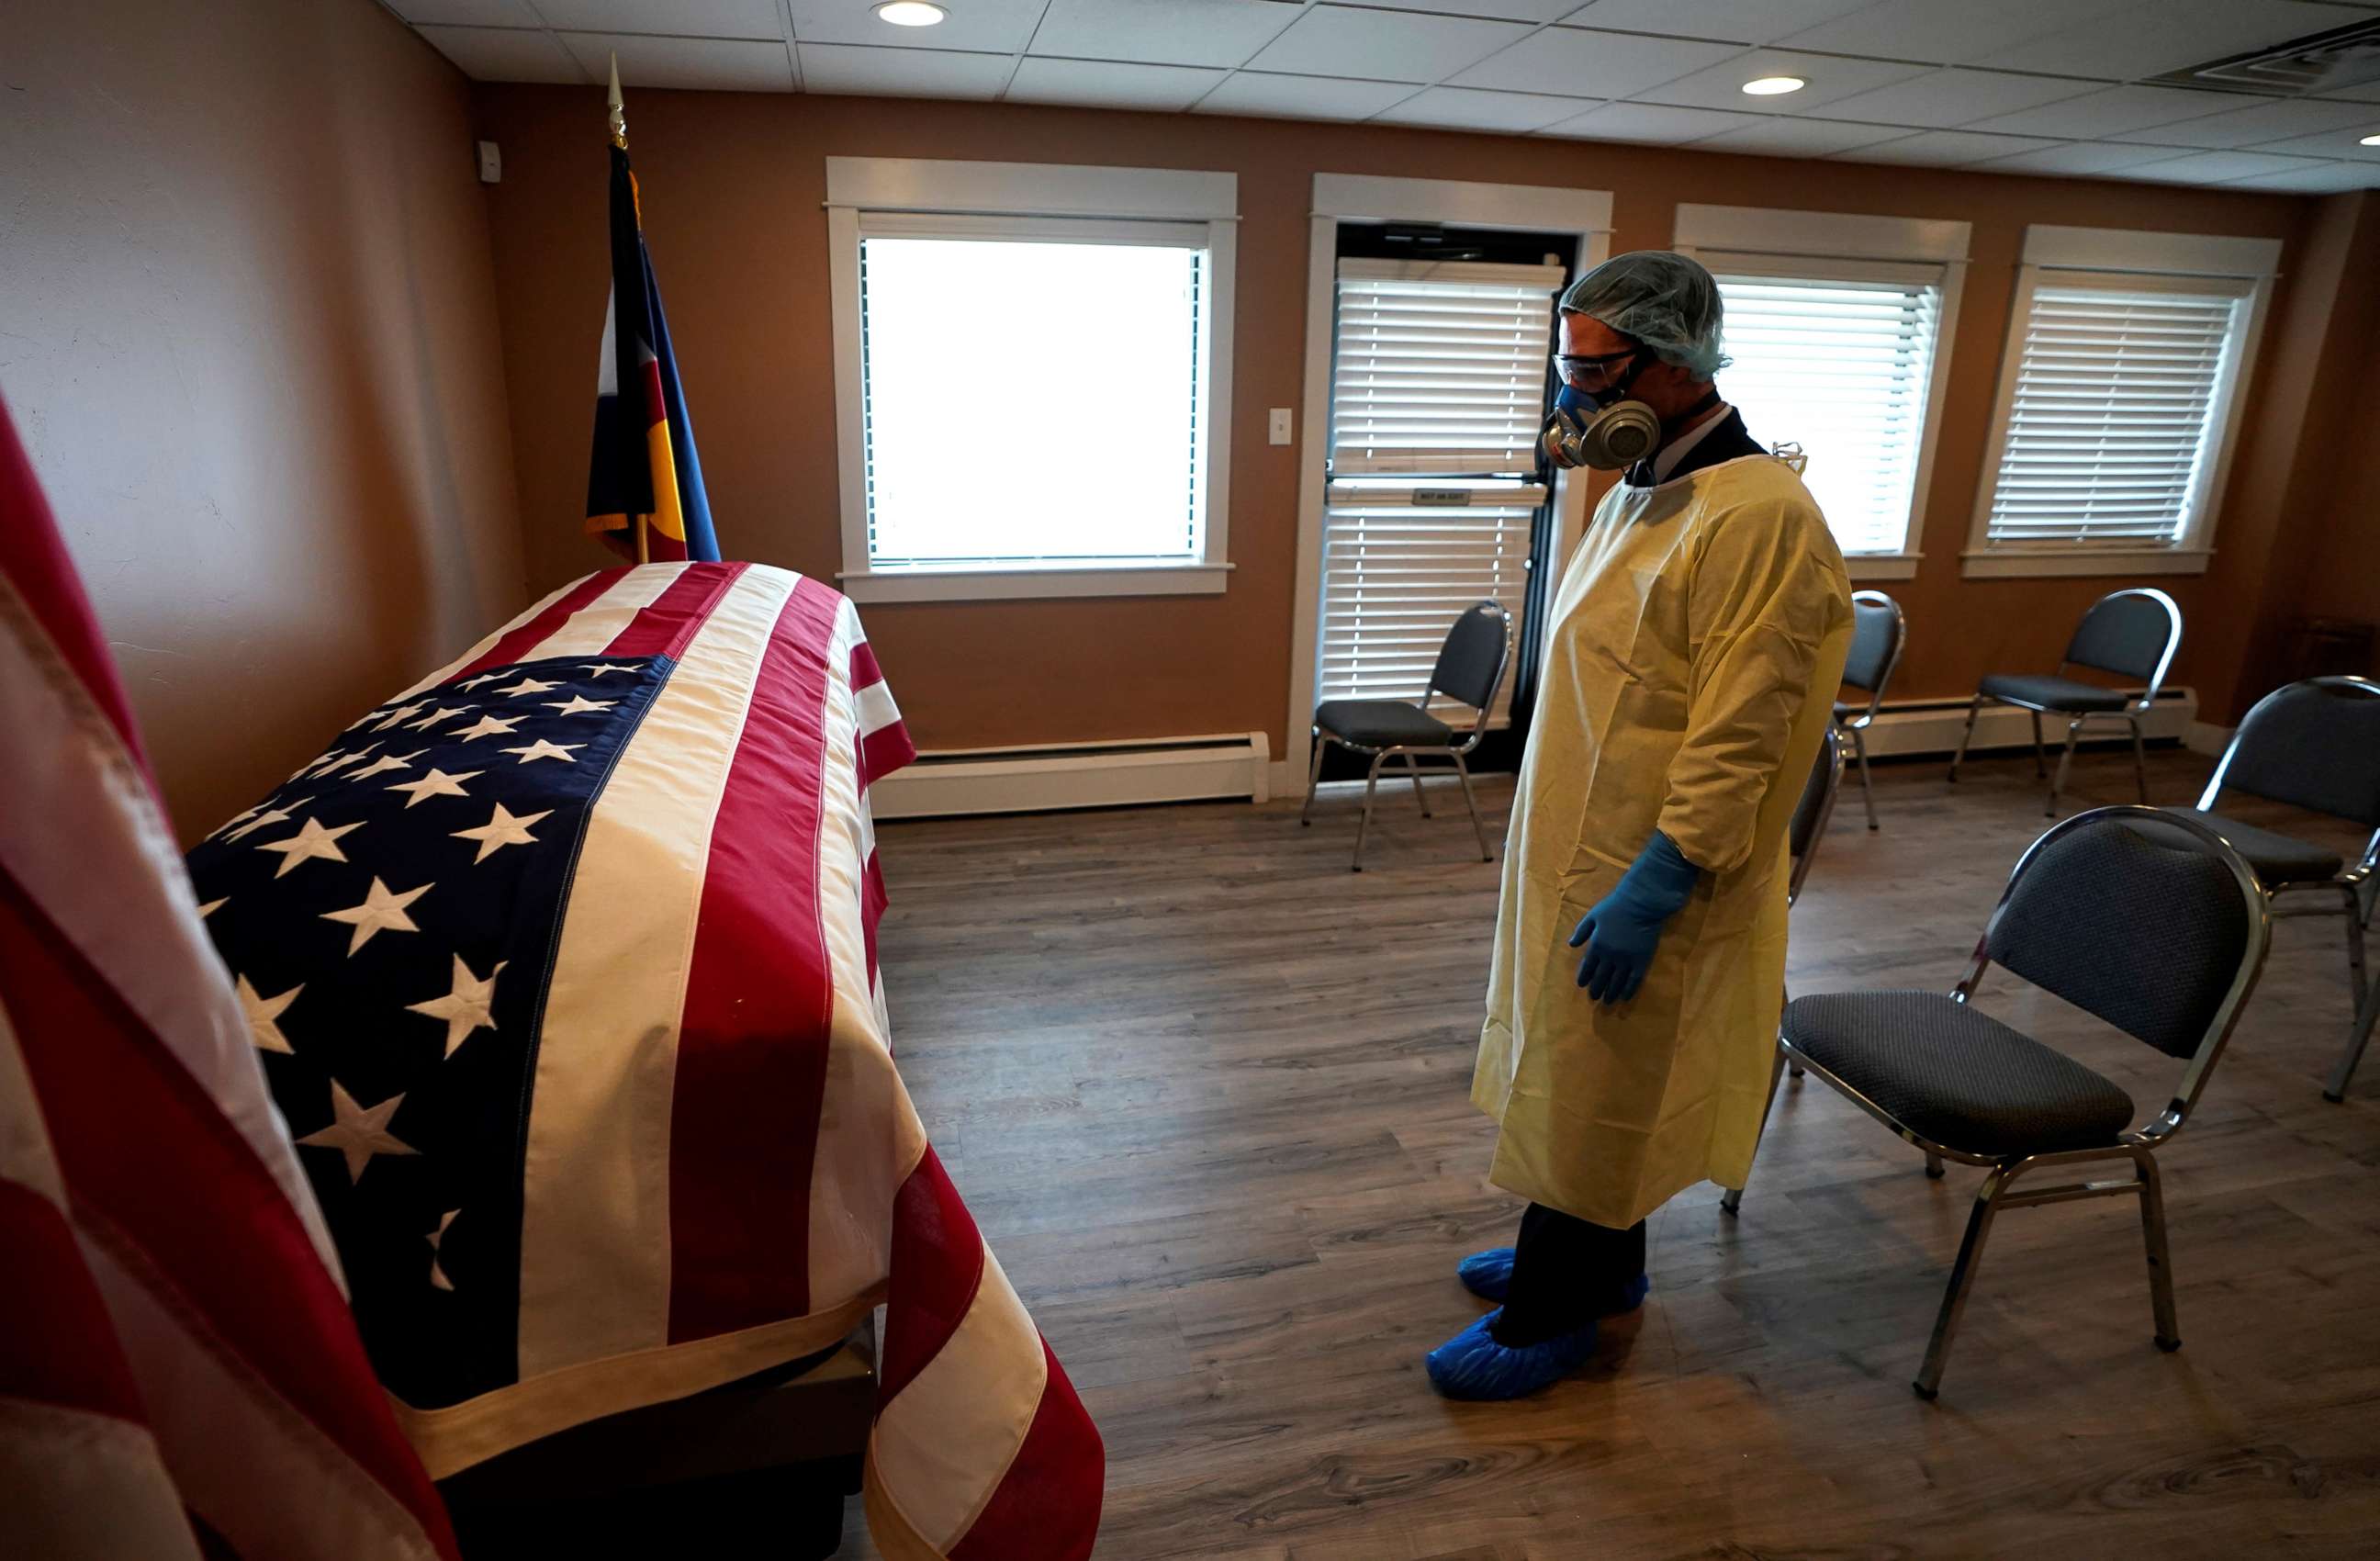 PHOTO: Michael Neel, funeral director of of All Veterans Funeral and Cremation, wearing full PPE, looks at the U.S. flag on the casket of George Trefren, a 90 year old Korean War veteran who died of COVID-19 in a nursing home, in Denver, April 23, 2020.